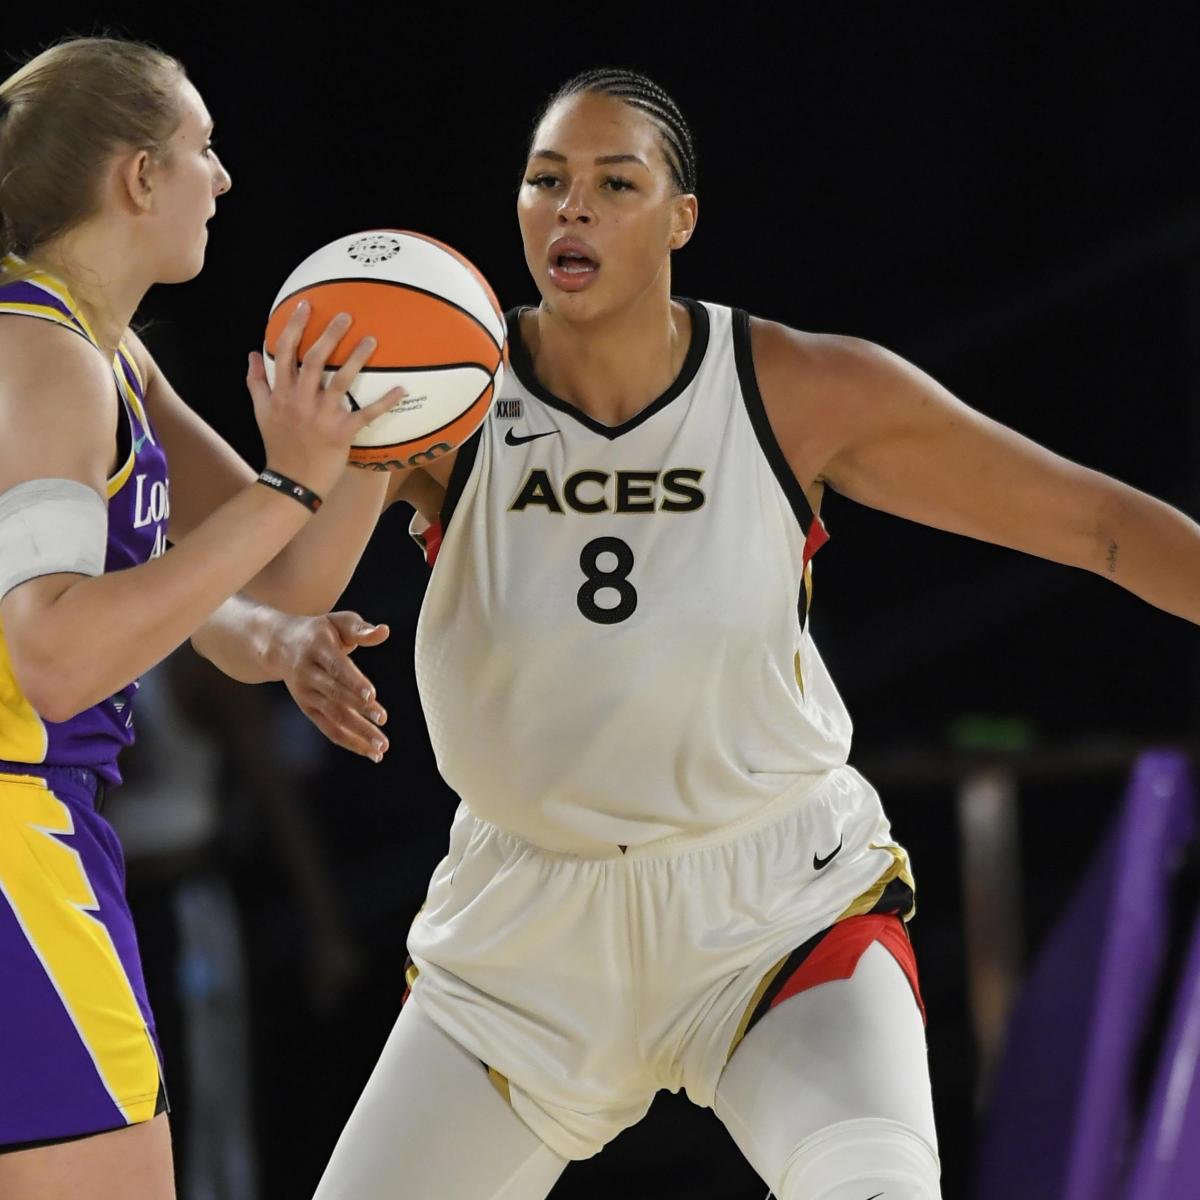 Winners and Losers from Wild 2022 WNBA Free Agency (So Far) News